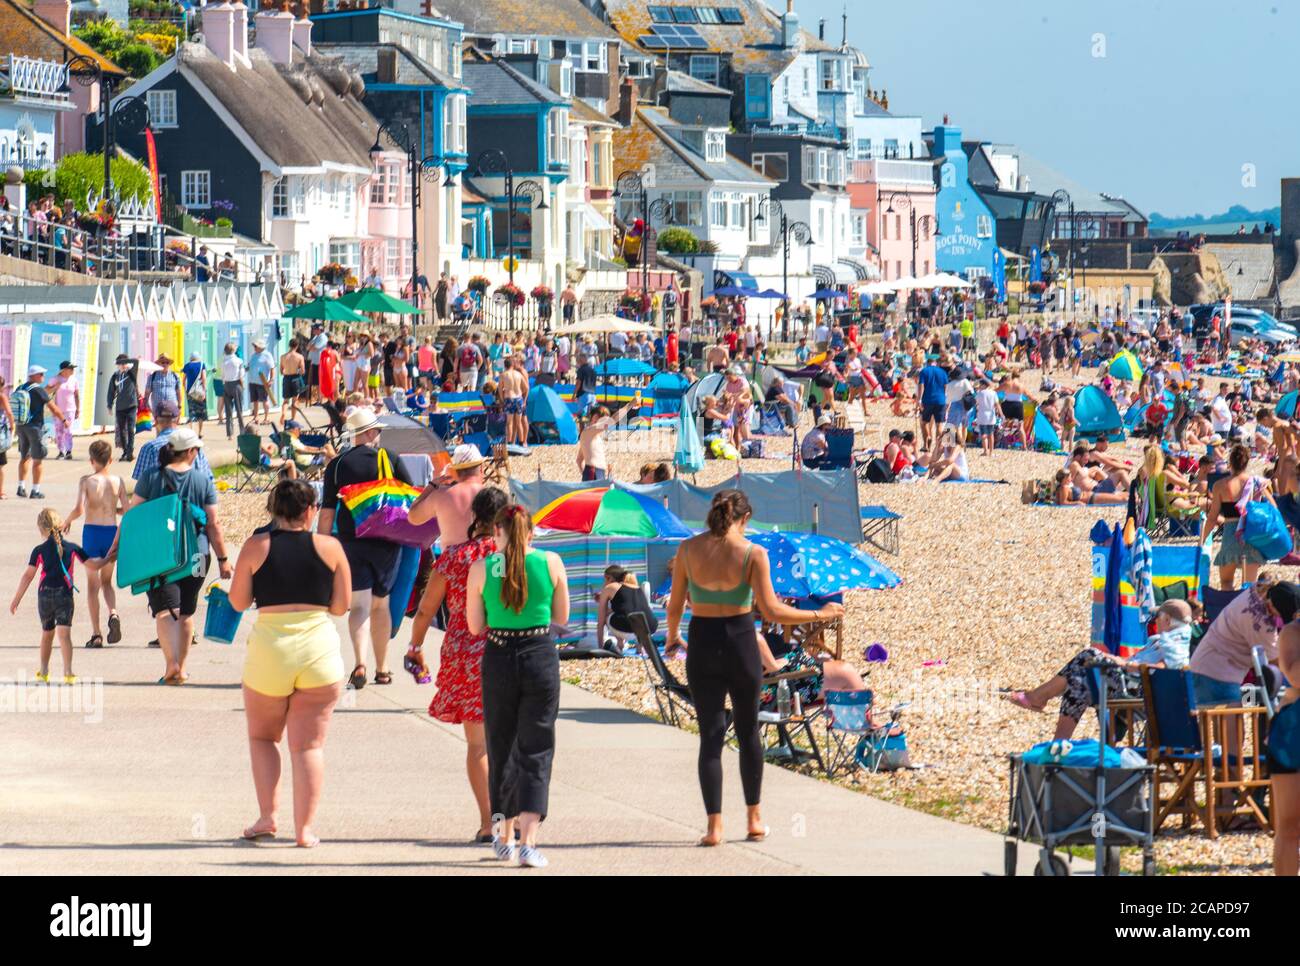 Lyme Regis, Dorset, UK. 8th Aug, 2020. UK Weather: Crowds of holidaymakers and sunseekers pack out the beach at the seaside resort of Lyme Regis, Dorset to bask in another day of sizzling hot sunshine as the heatwave continues. Lyme Regis was full to capacity by 11.30am. Credit: Celia McMahon/Alamy Live News Stock Photo